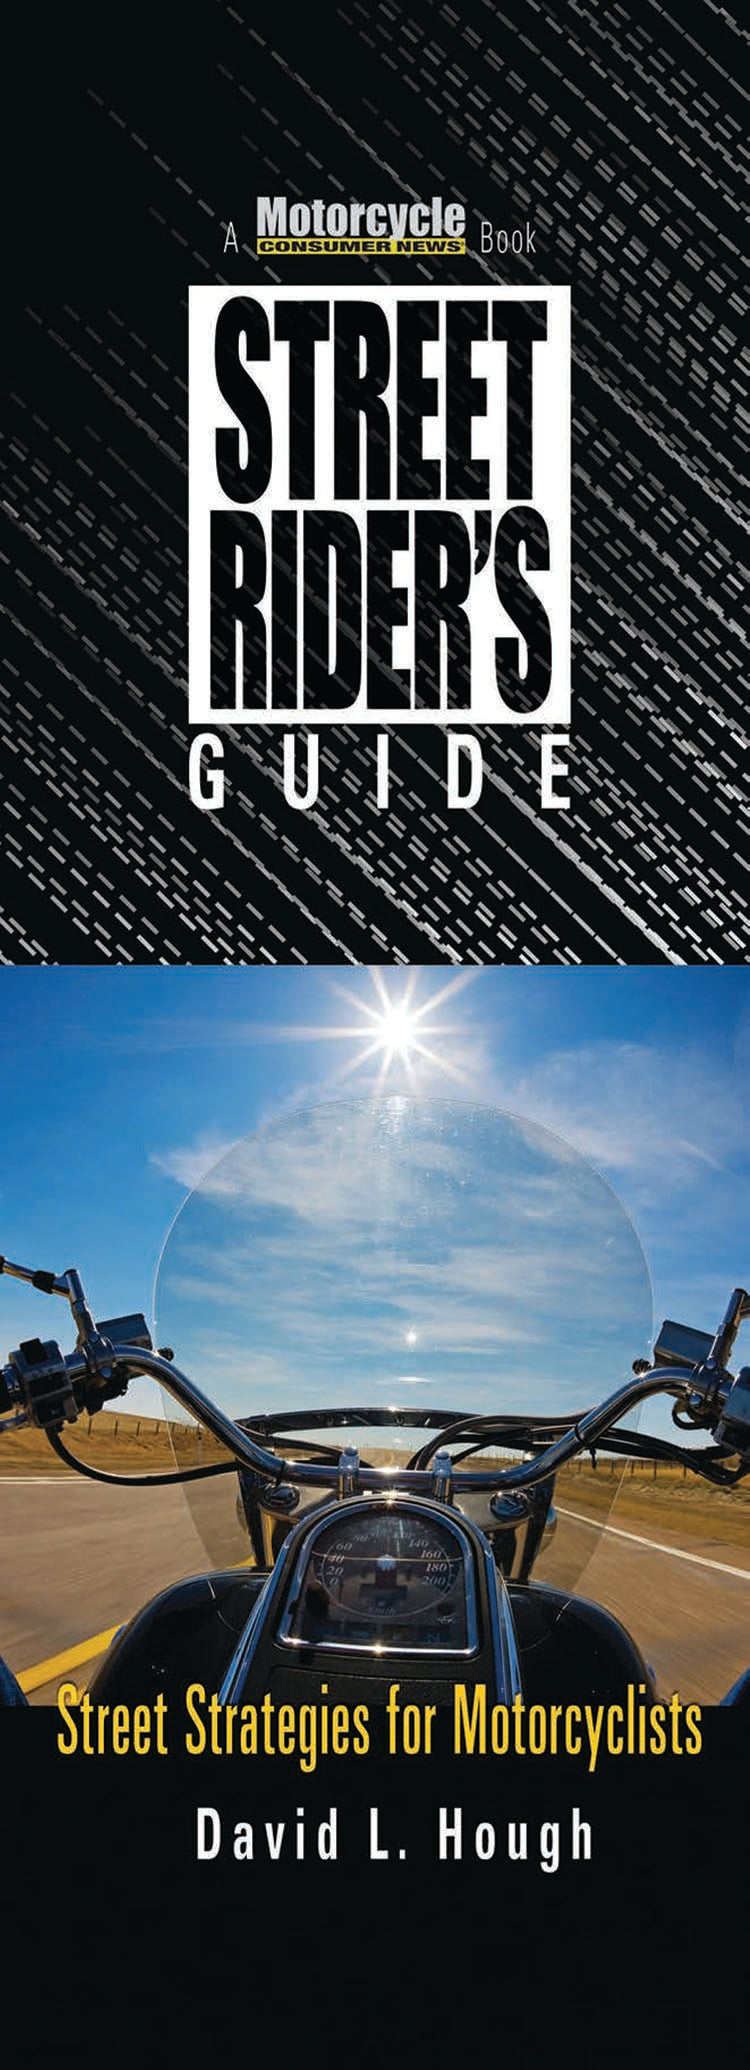 STREET RIDER'S GUIDE